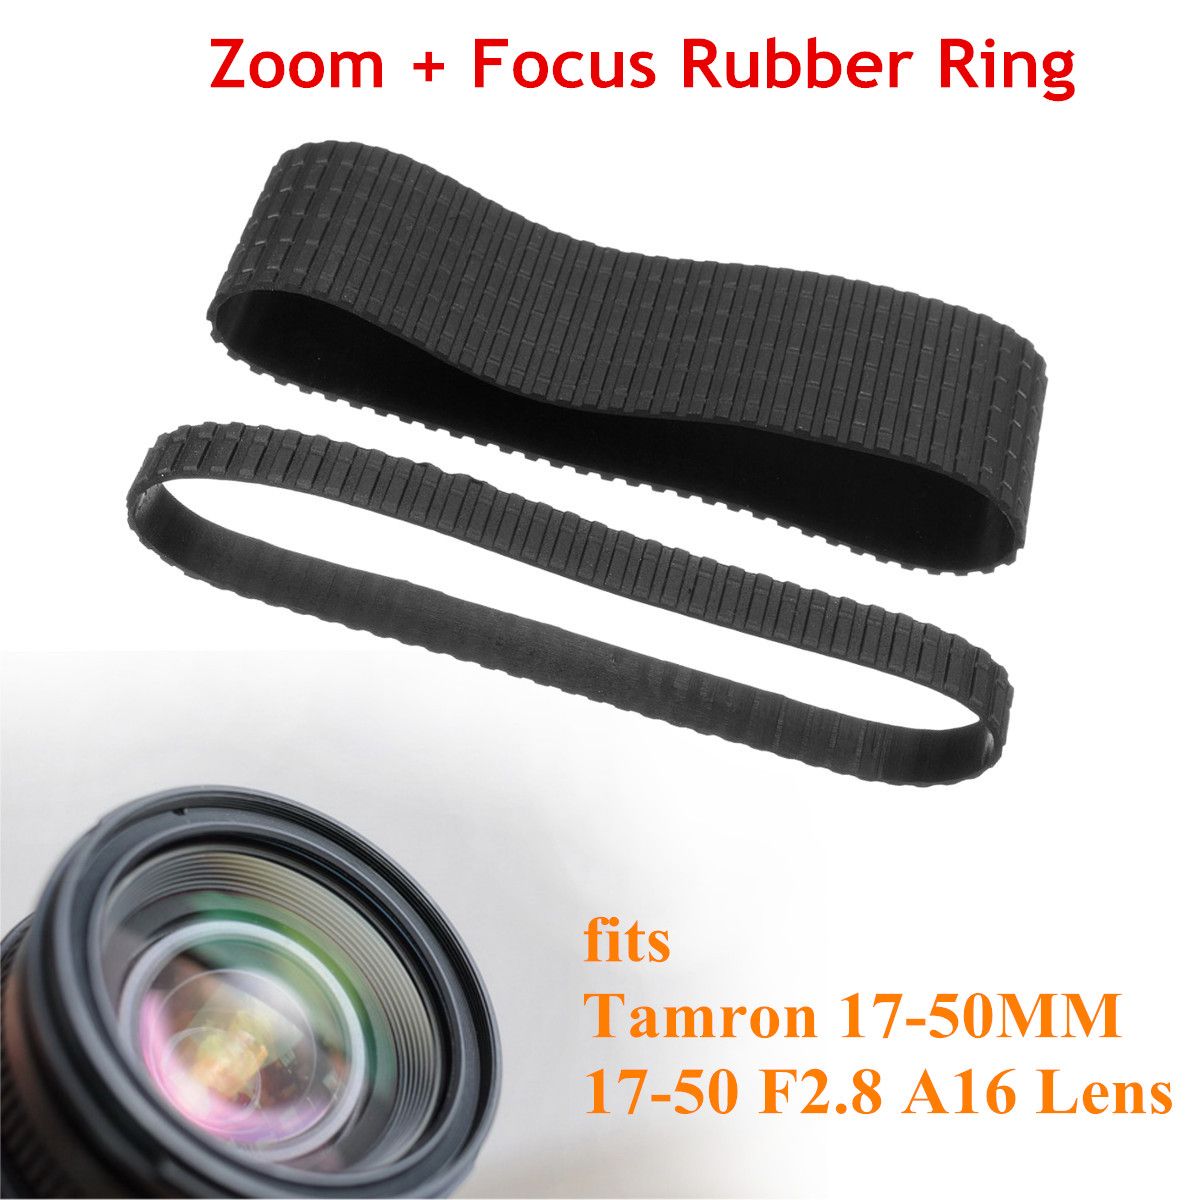 Zoom-and-Focus-Grip-Rubber-Ring-Set-For-Tamron-17-50MM-17-50-F28-A16-Lens-1174124